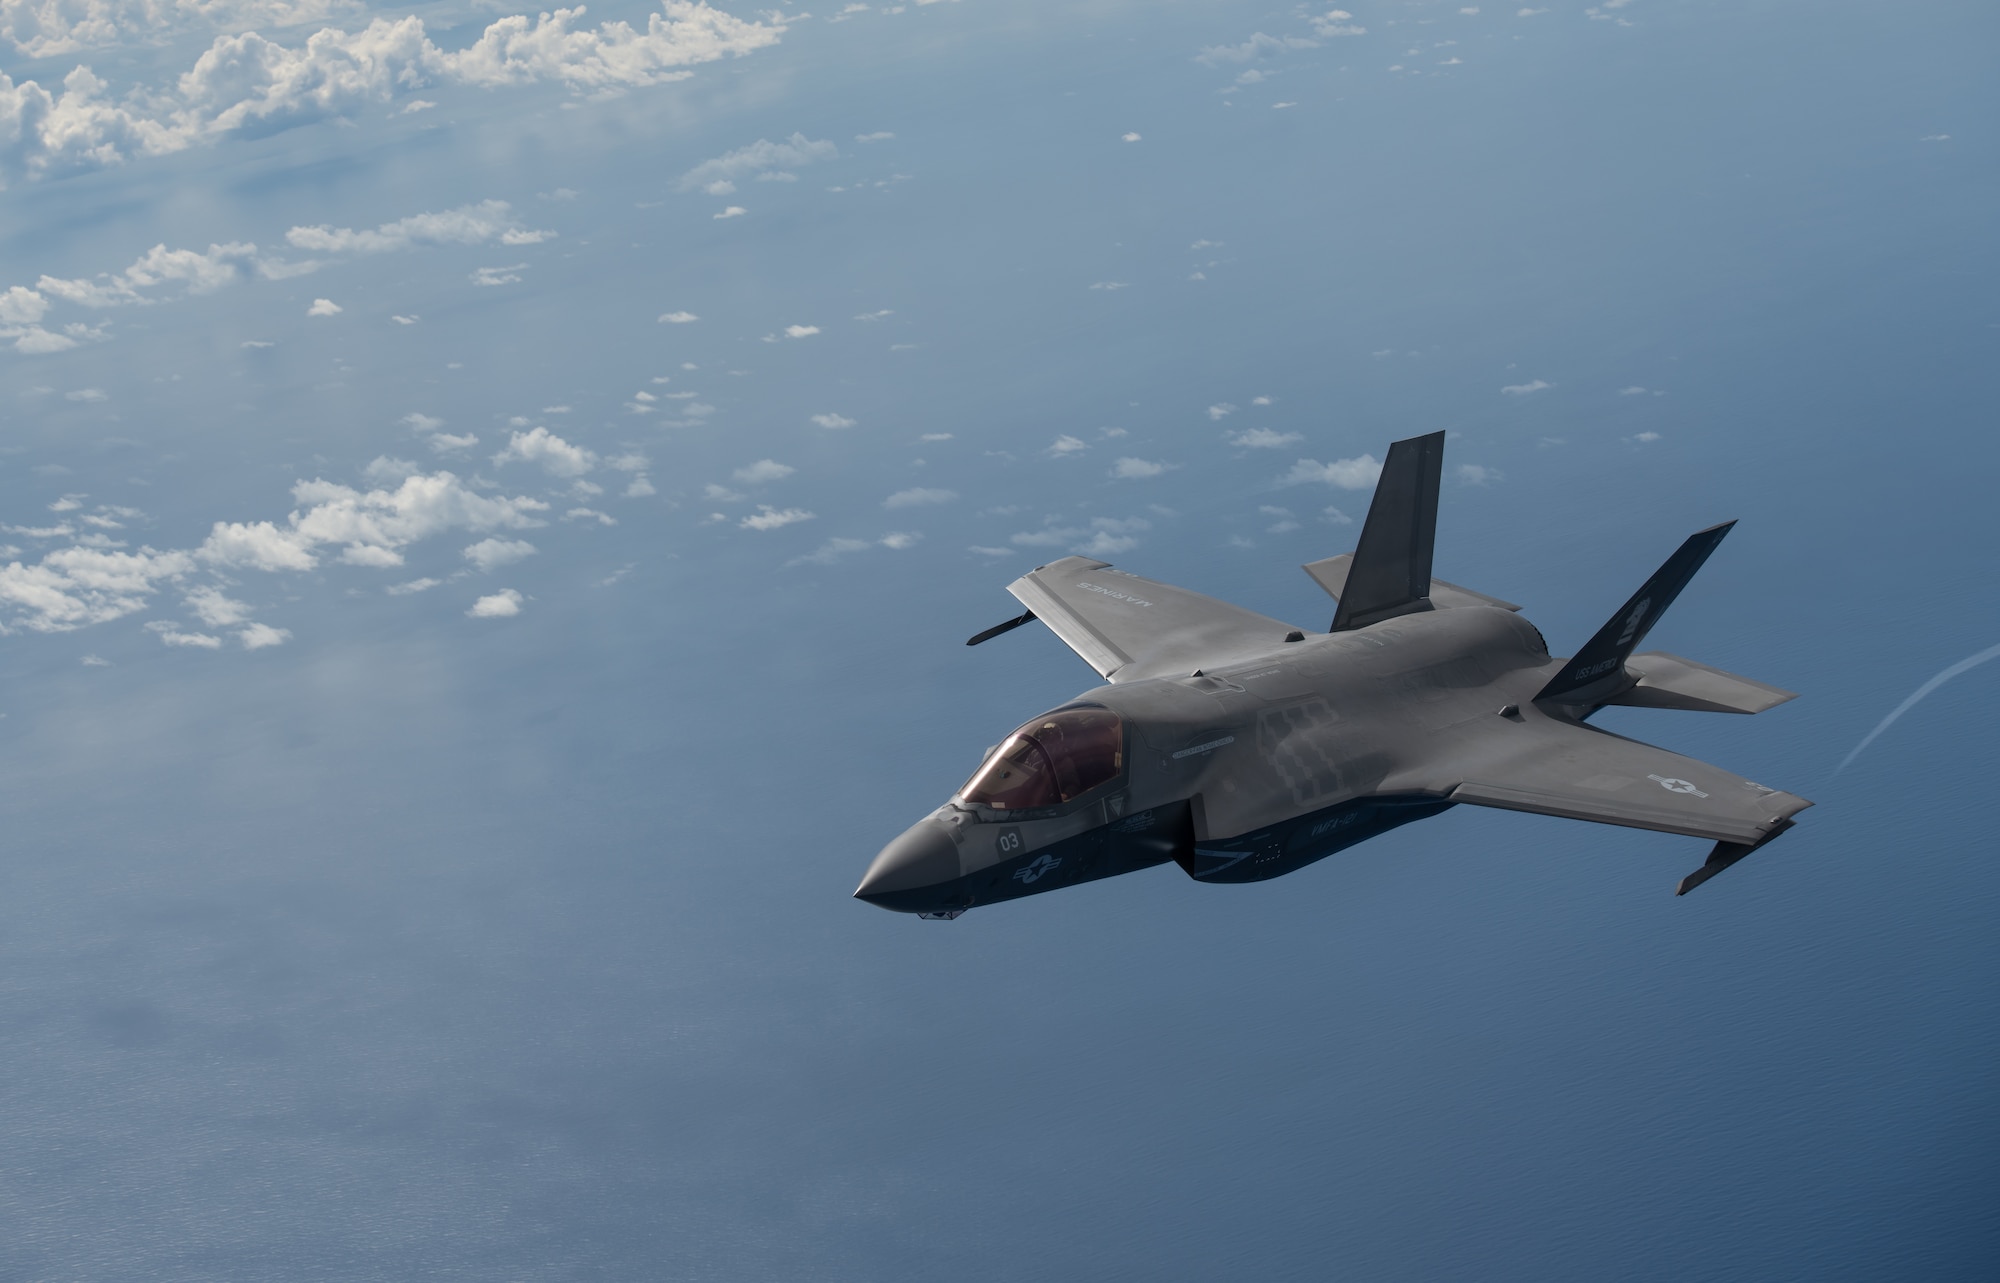 A U.S. Marine Corps F-35B Lightning II, Marine Fighter Attack Squadron based out of Marine Corps Air Station MCAS Iwakuni, Japan, breaks away after receiving fuel from a KC-135 Stratotanker assigned to the 909th Air Refueling Squadron, Kadena Air Base, Japan during a Large Scale Global Exercise 21 mission over the western Pacific Ocean, Aug. 18, 2021. World events underscore the urgency to develop the multi-domain operating capability; especially in the Indo-Pacific. (U.S. Air Force photo by Tech. Sgt. Micaiah Anthony)